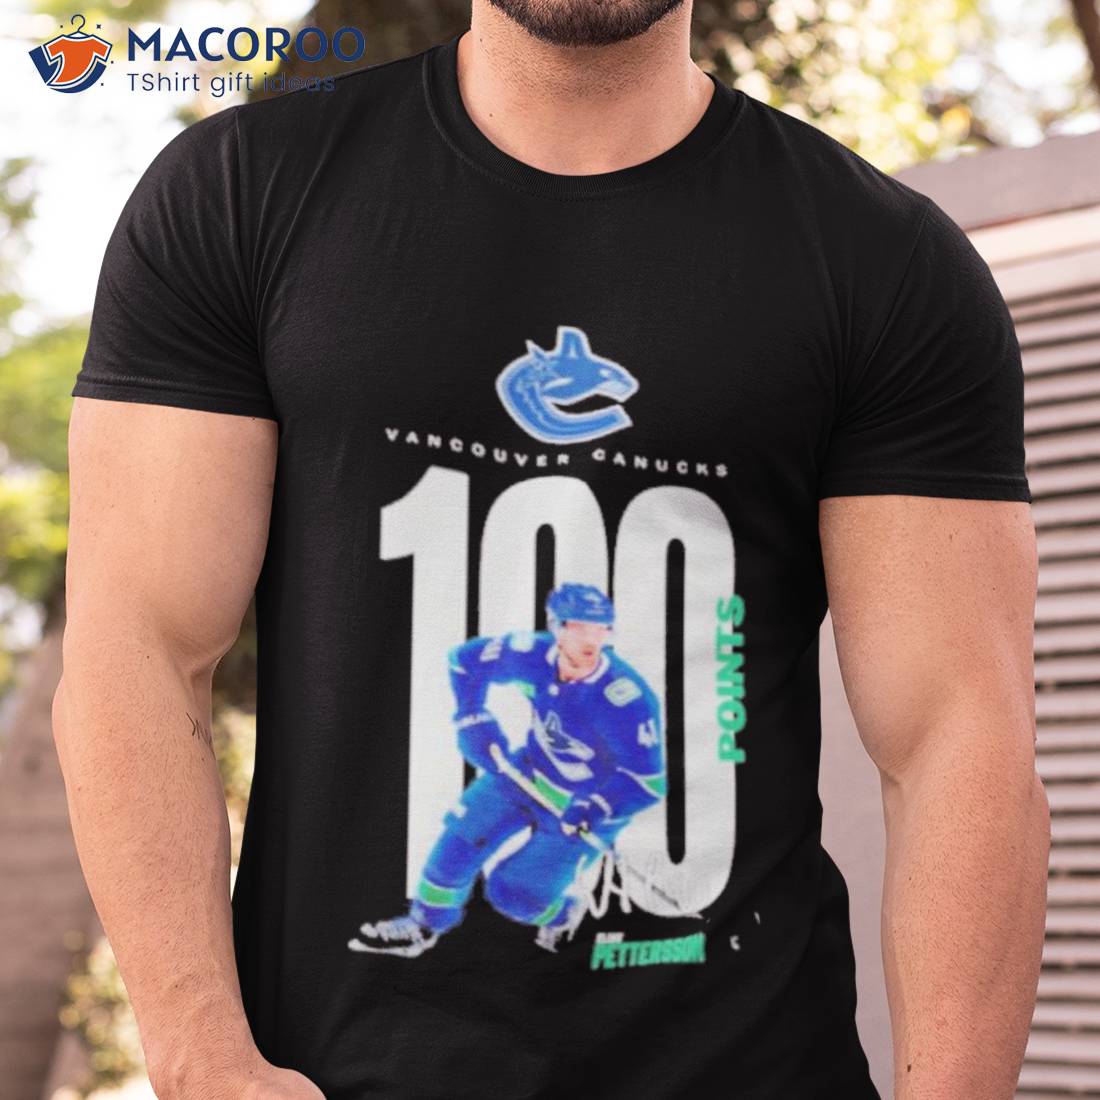 Canuck T-Shirts for Sale